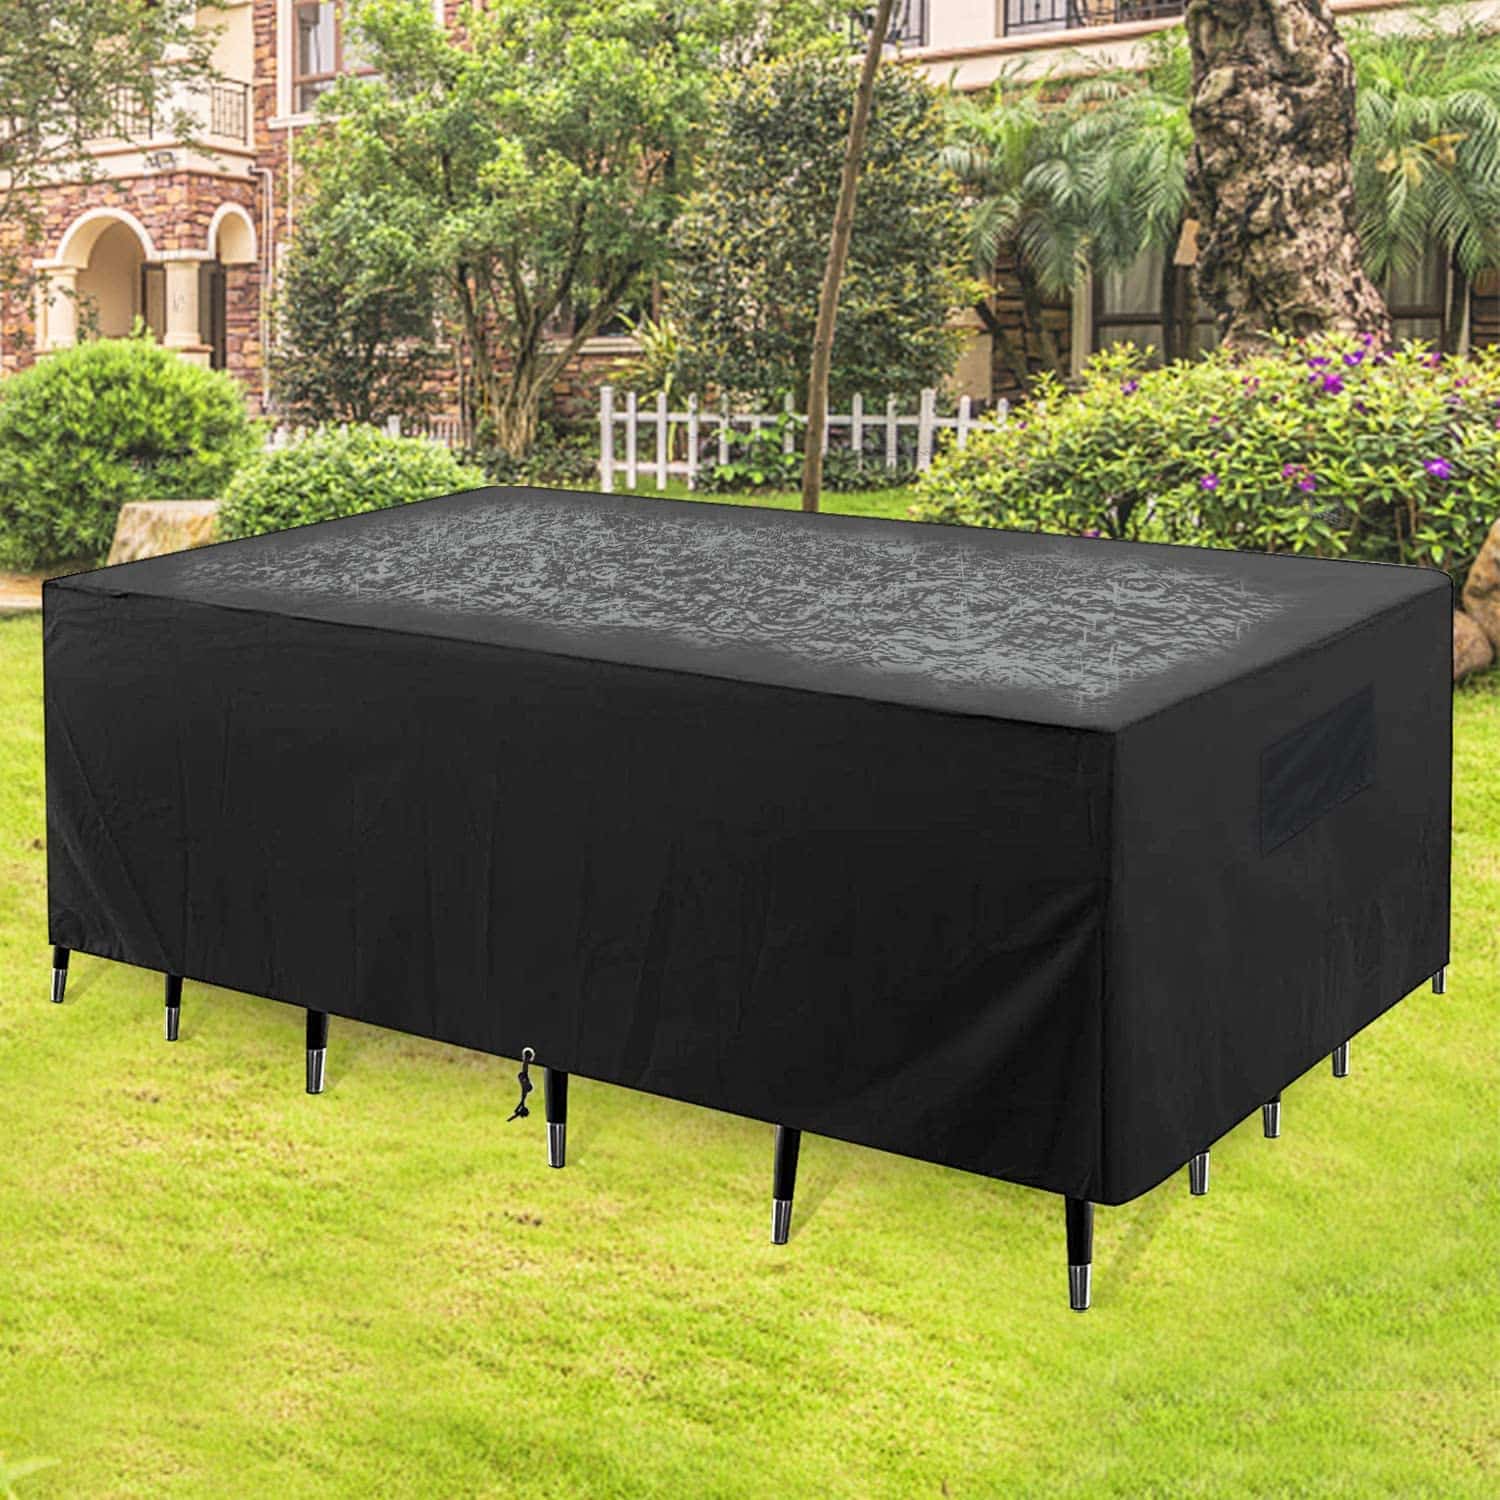 4 Sizes 210D Waterproof Furniture Cover Home Garden Patio Wicker Table ...